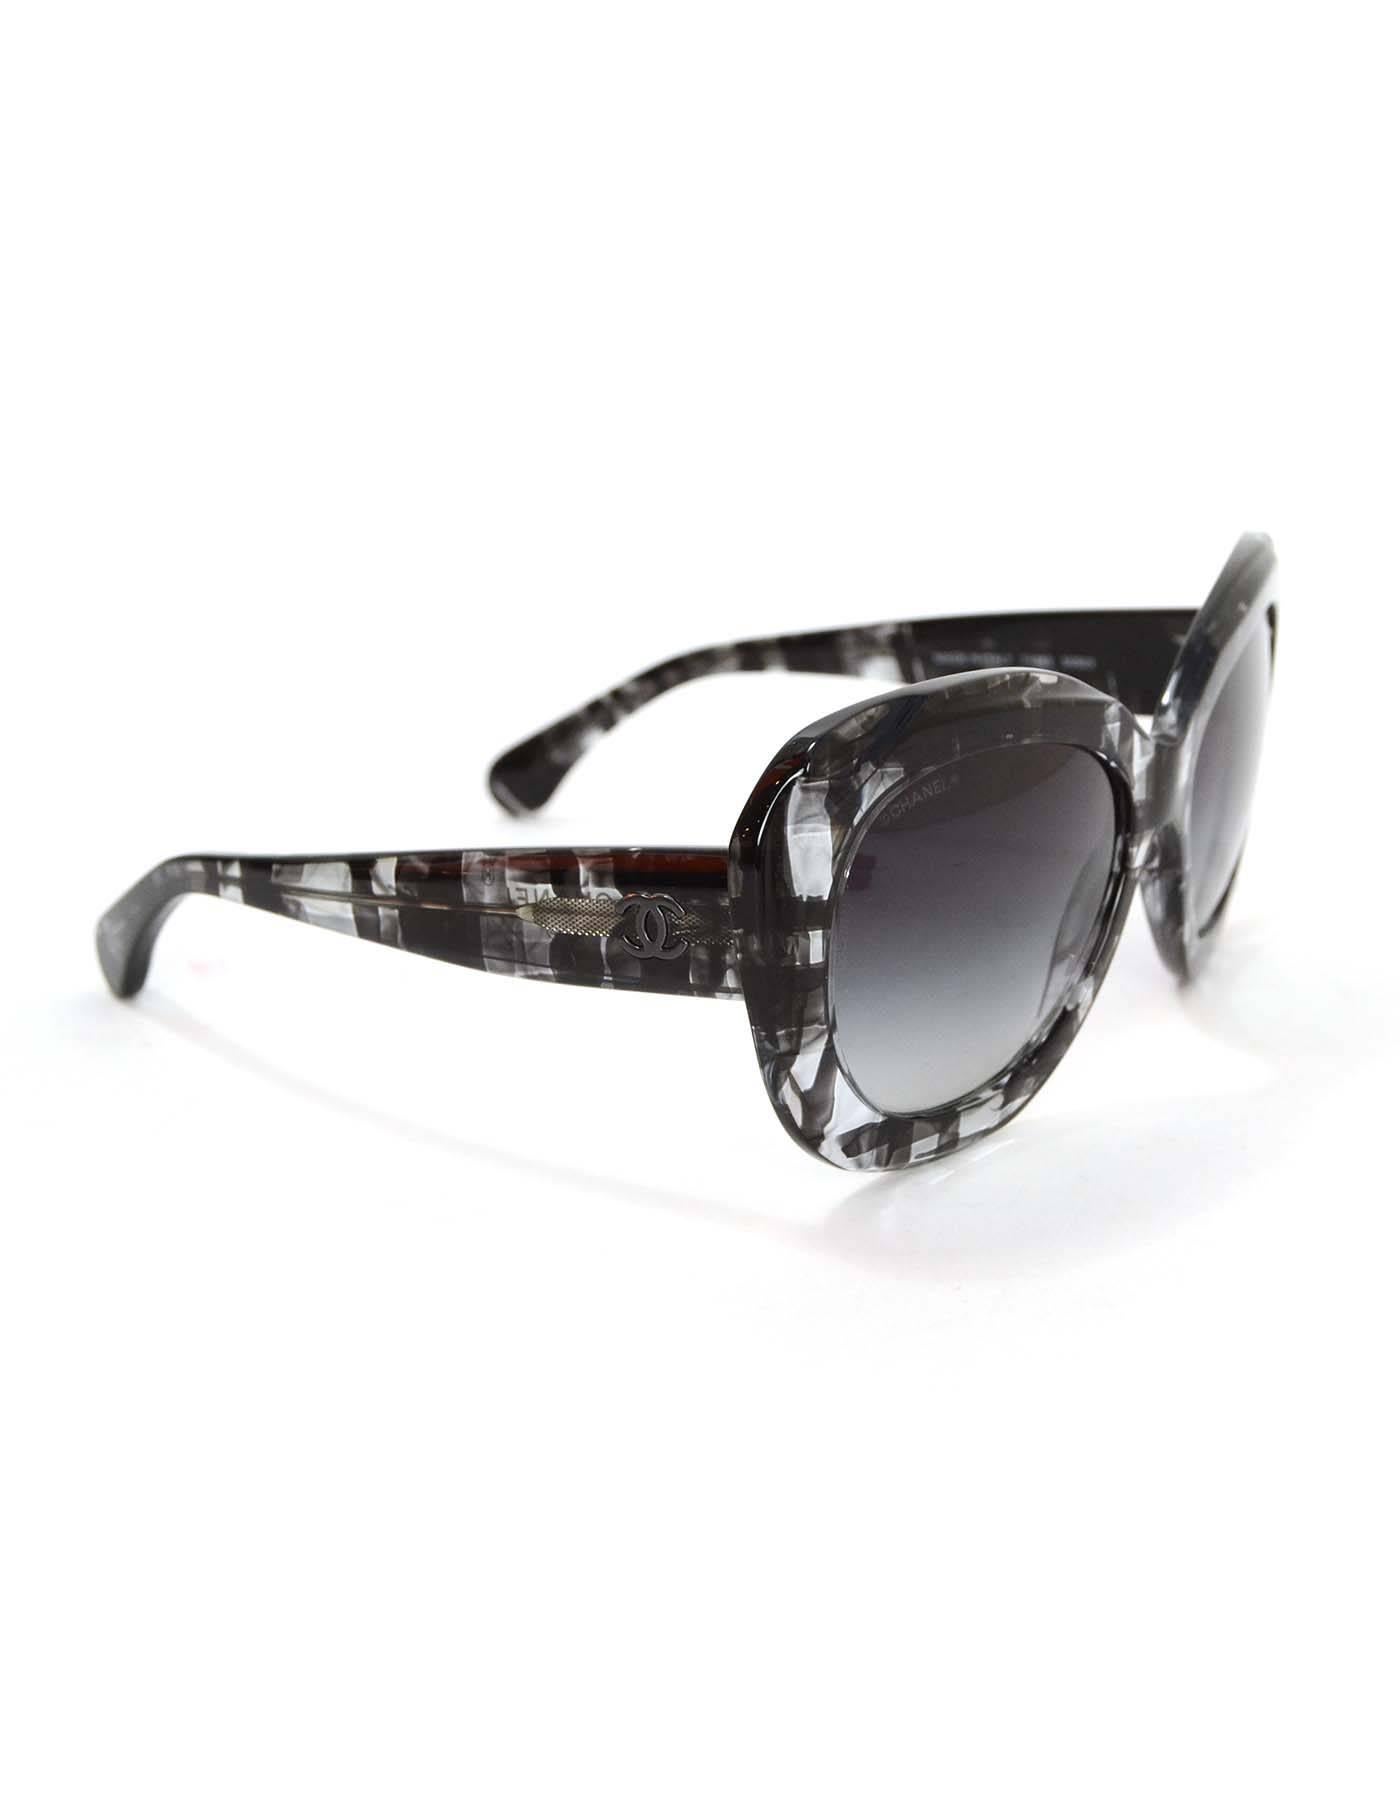 Chanel Clear & Black Plaid Print Resin Sunglasses
Features jagged cuts on frame near lenses for a textured appearance
Made In: Italy
Color: Black, clear and grey
Materials: Resin
Identification Number: BC10483314
Model: 71083 S0923
Overall